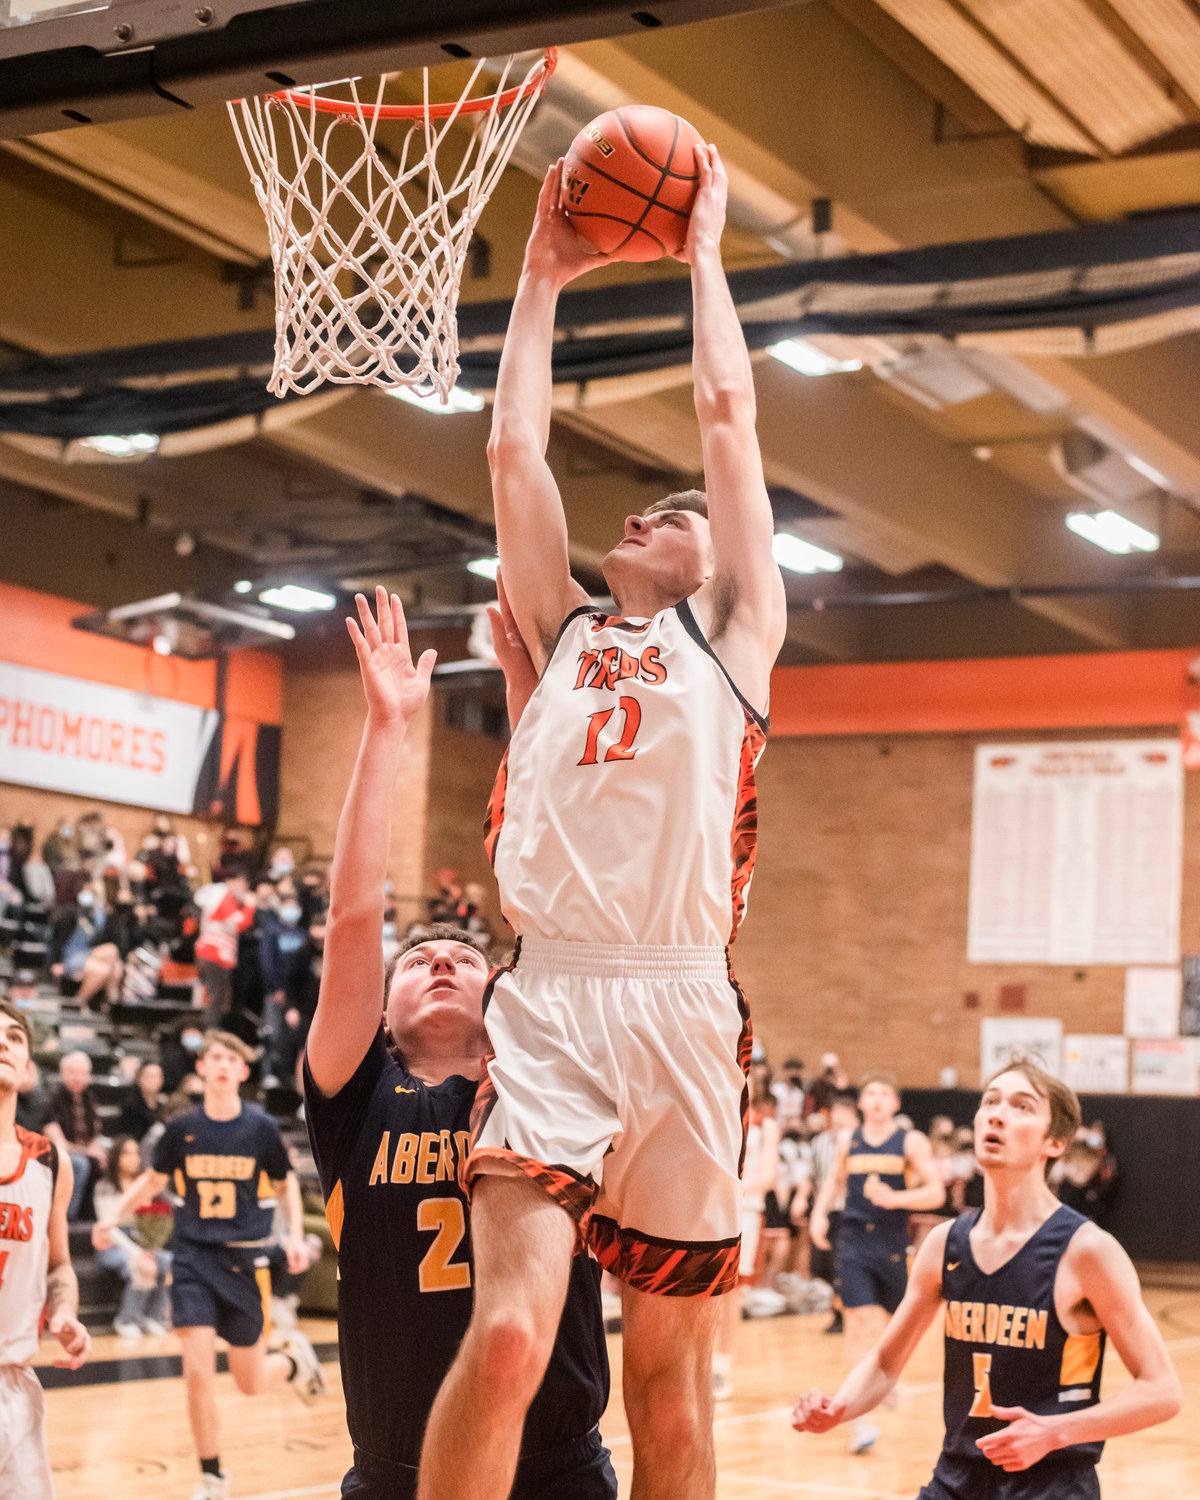 Centralia’s Landon Kaut (12) goes up with the ball Friday night during a game.